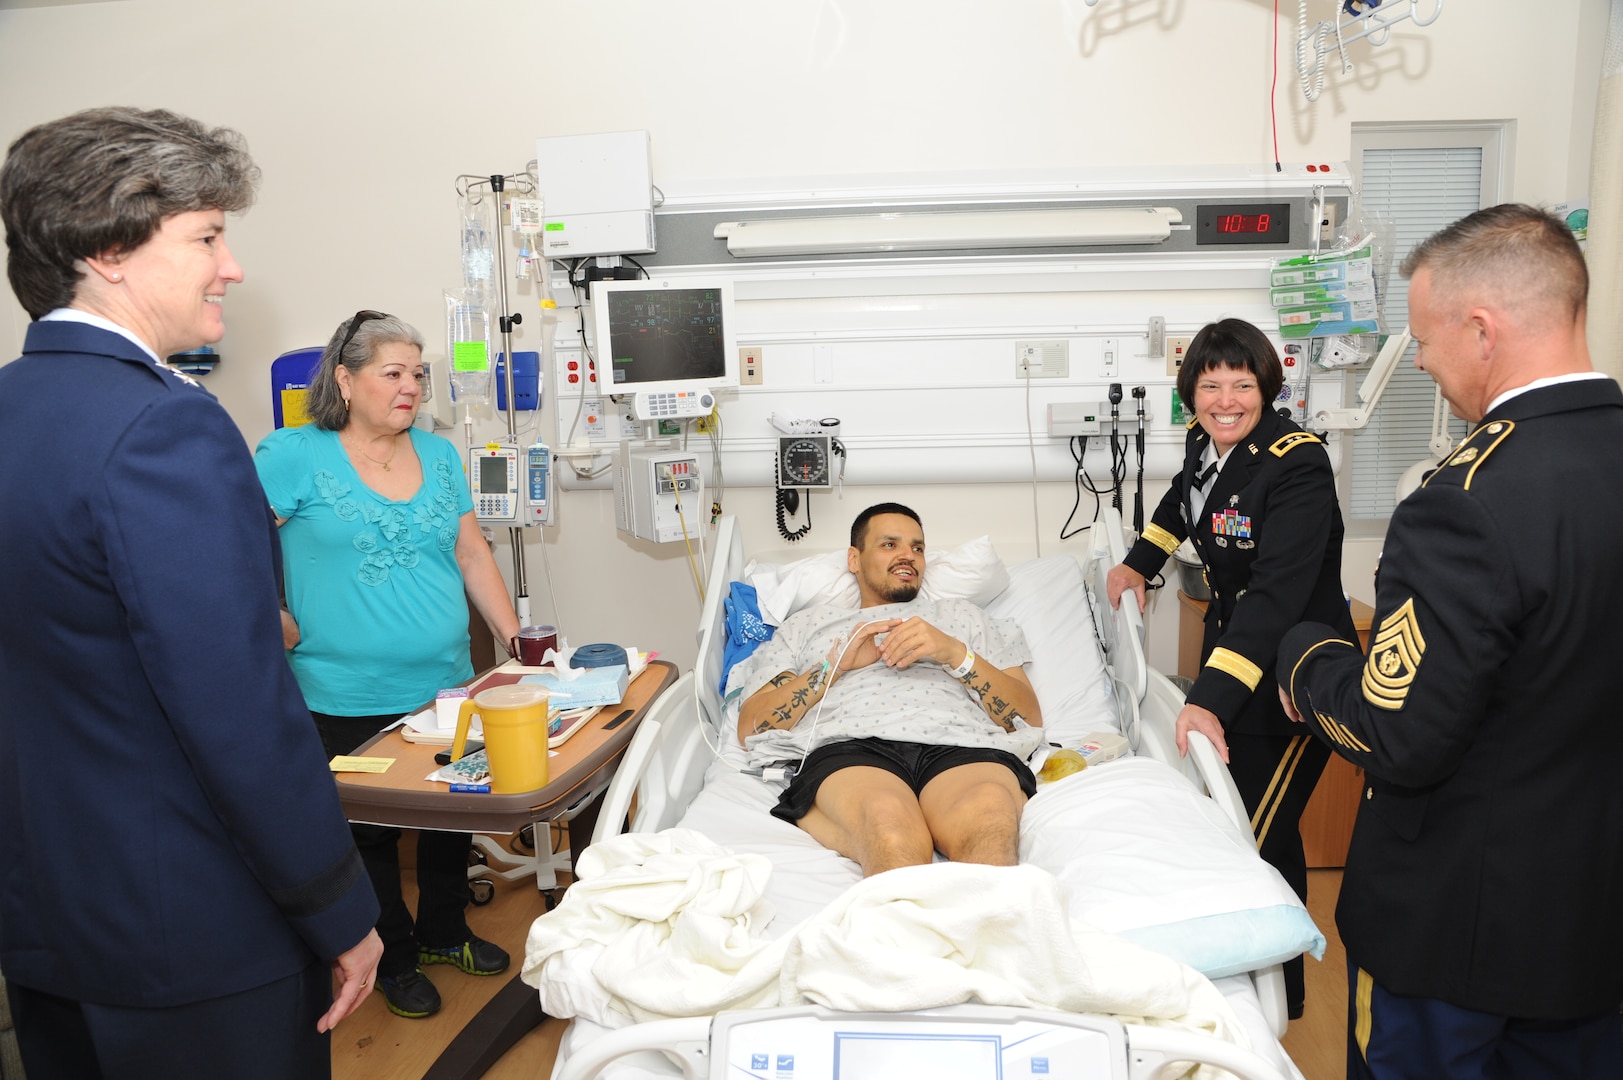 Maximiliano M. Martinez, Army veteran, center, and his mother, Olga Alcoser, back left, are greeted by Army Maj. Gen. Jimmie Keenan, Southern Regional Medical Command commander, back right, Air Force Maj. Gen. Peggy Poore, Air Force Personnel Center commander, left, and Army Command Sgt. Maj. Jayme D. Johnson, Southern Regional Medical Command command sergeant major, right, during the 2014 National Salute to Veteran Patients Feb. 14 at the Audie Murphy VA Hospital in San Antonio.  The Joint Base San Antonio military ambassadors and JBSA military leaders were on hand to distribute valentines and visit with veteran patients. Veterans administration facilities across the United States pay tribute to veteran patients annually during this week-long salute. (U.S. Air Force photo by Melissa Peterson)